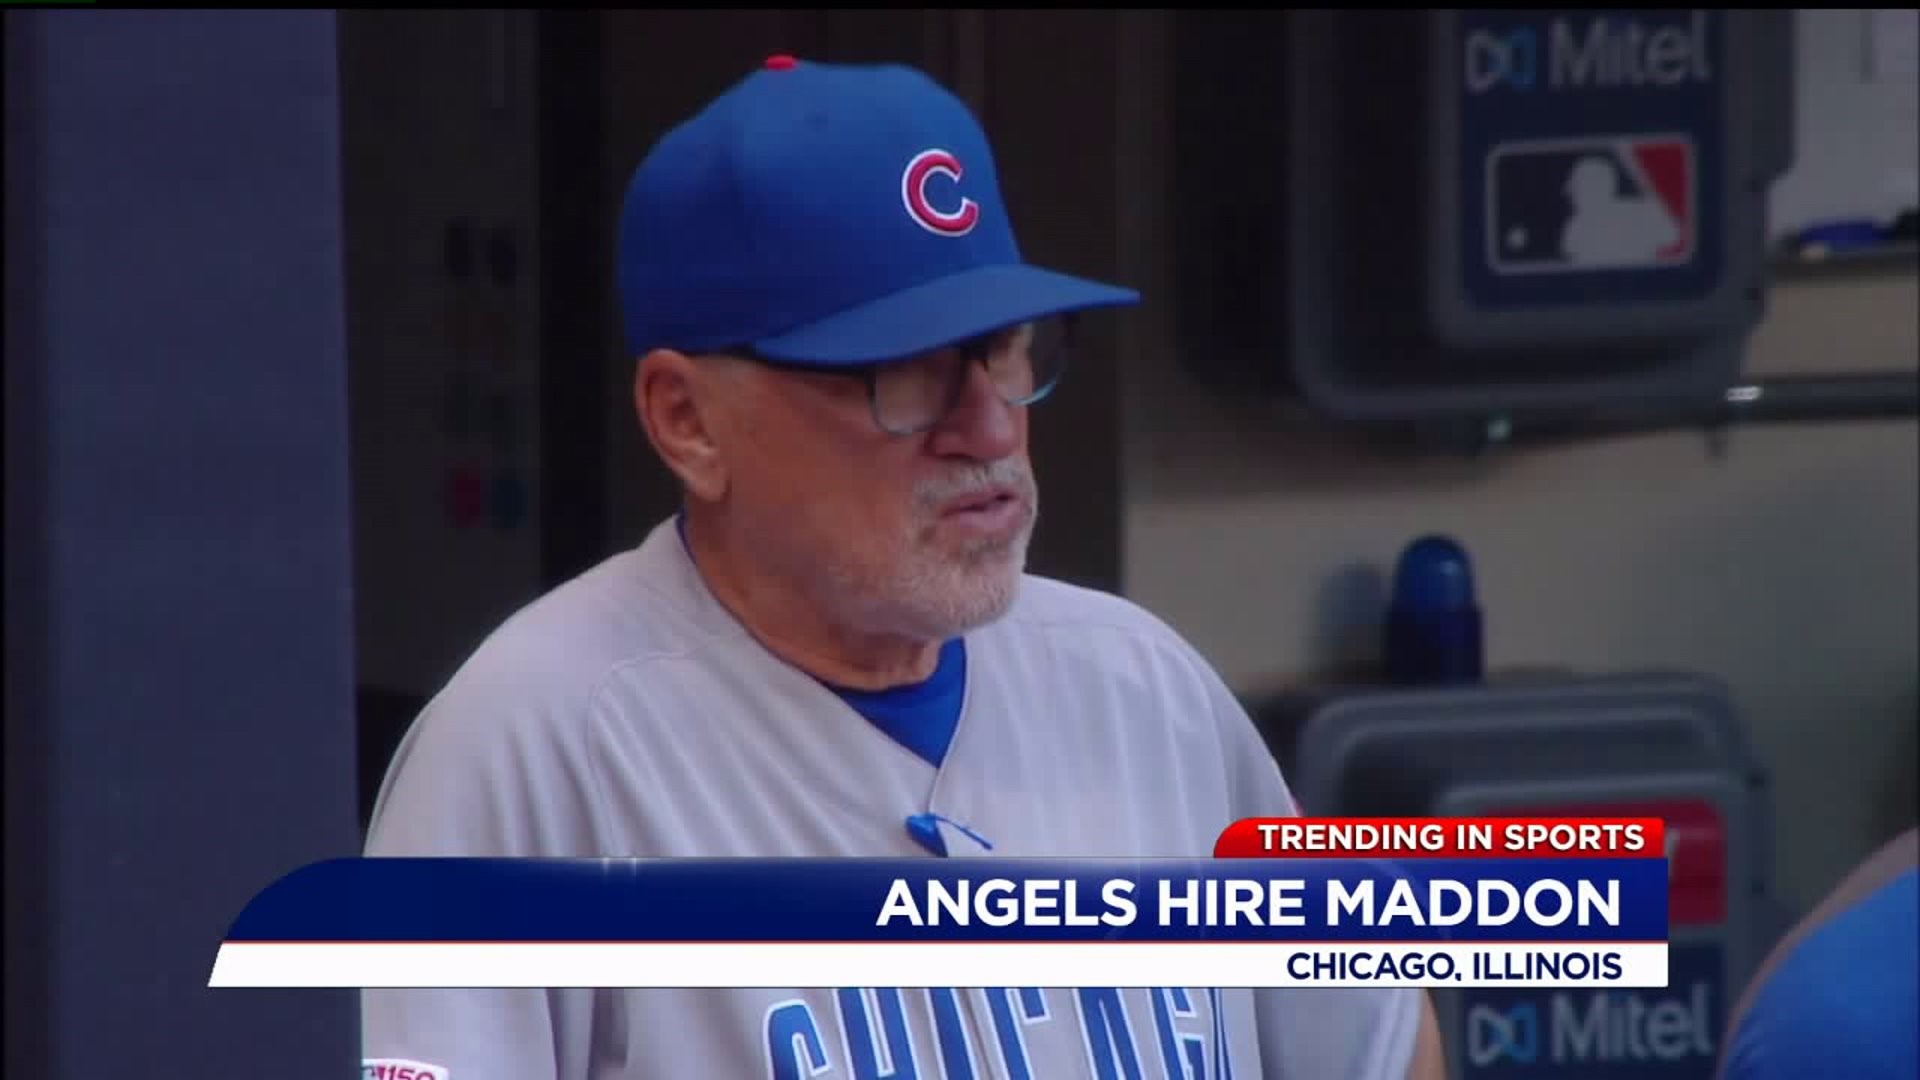 Joe Maddon returns to Los Angeles Angels as manager